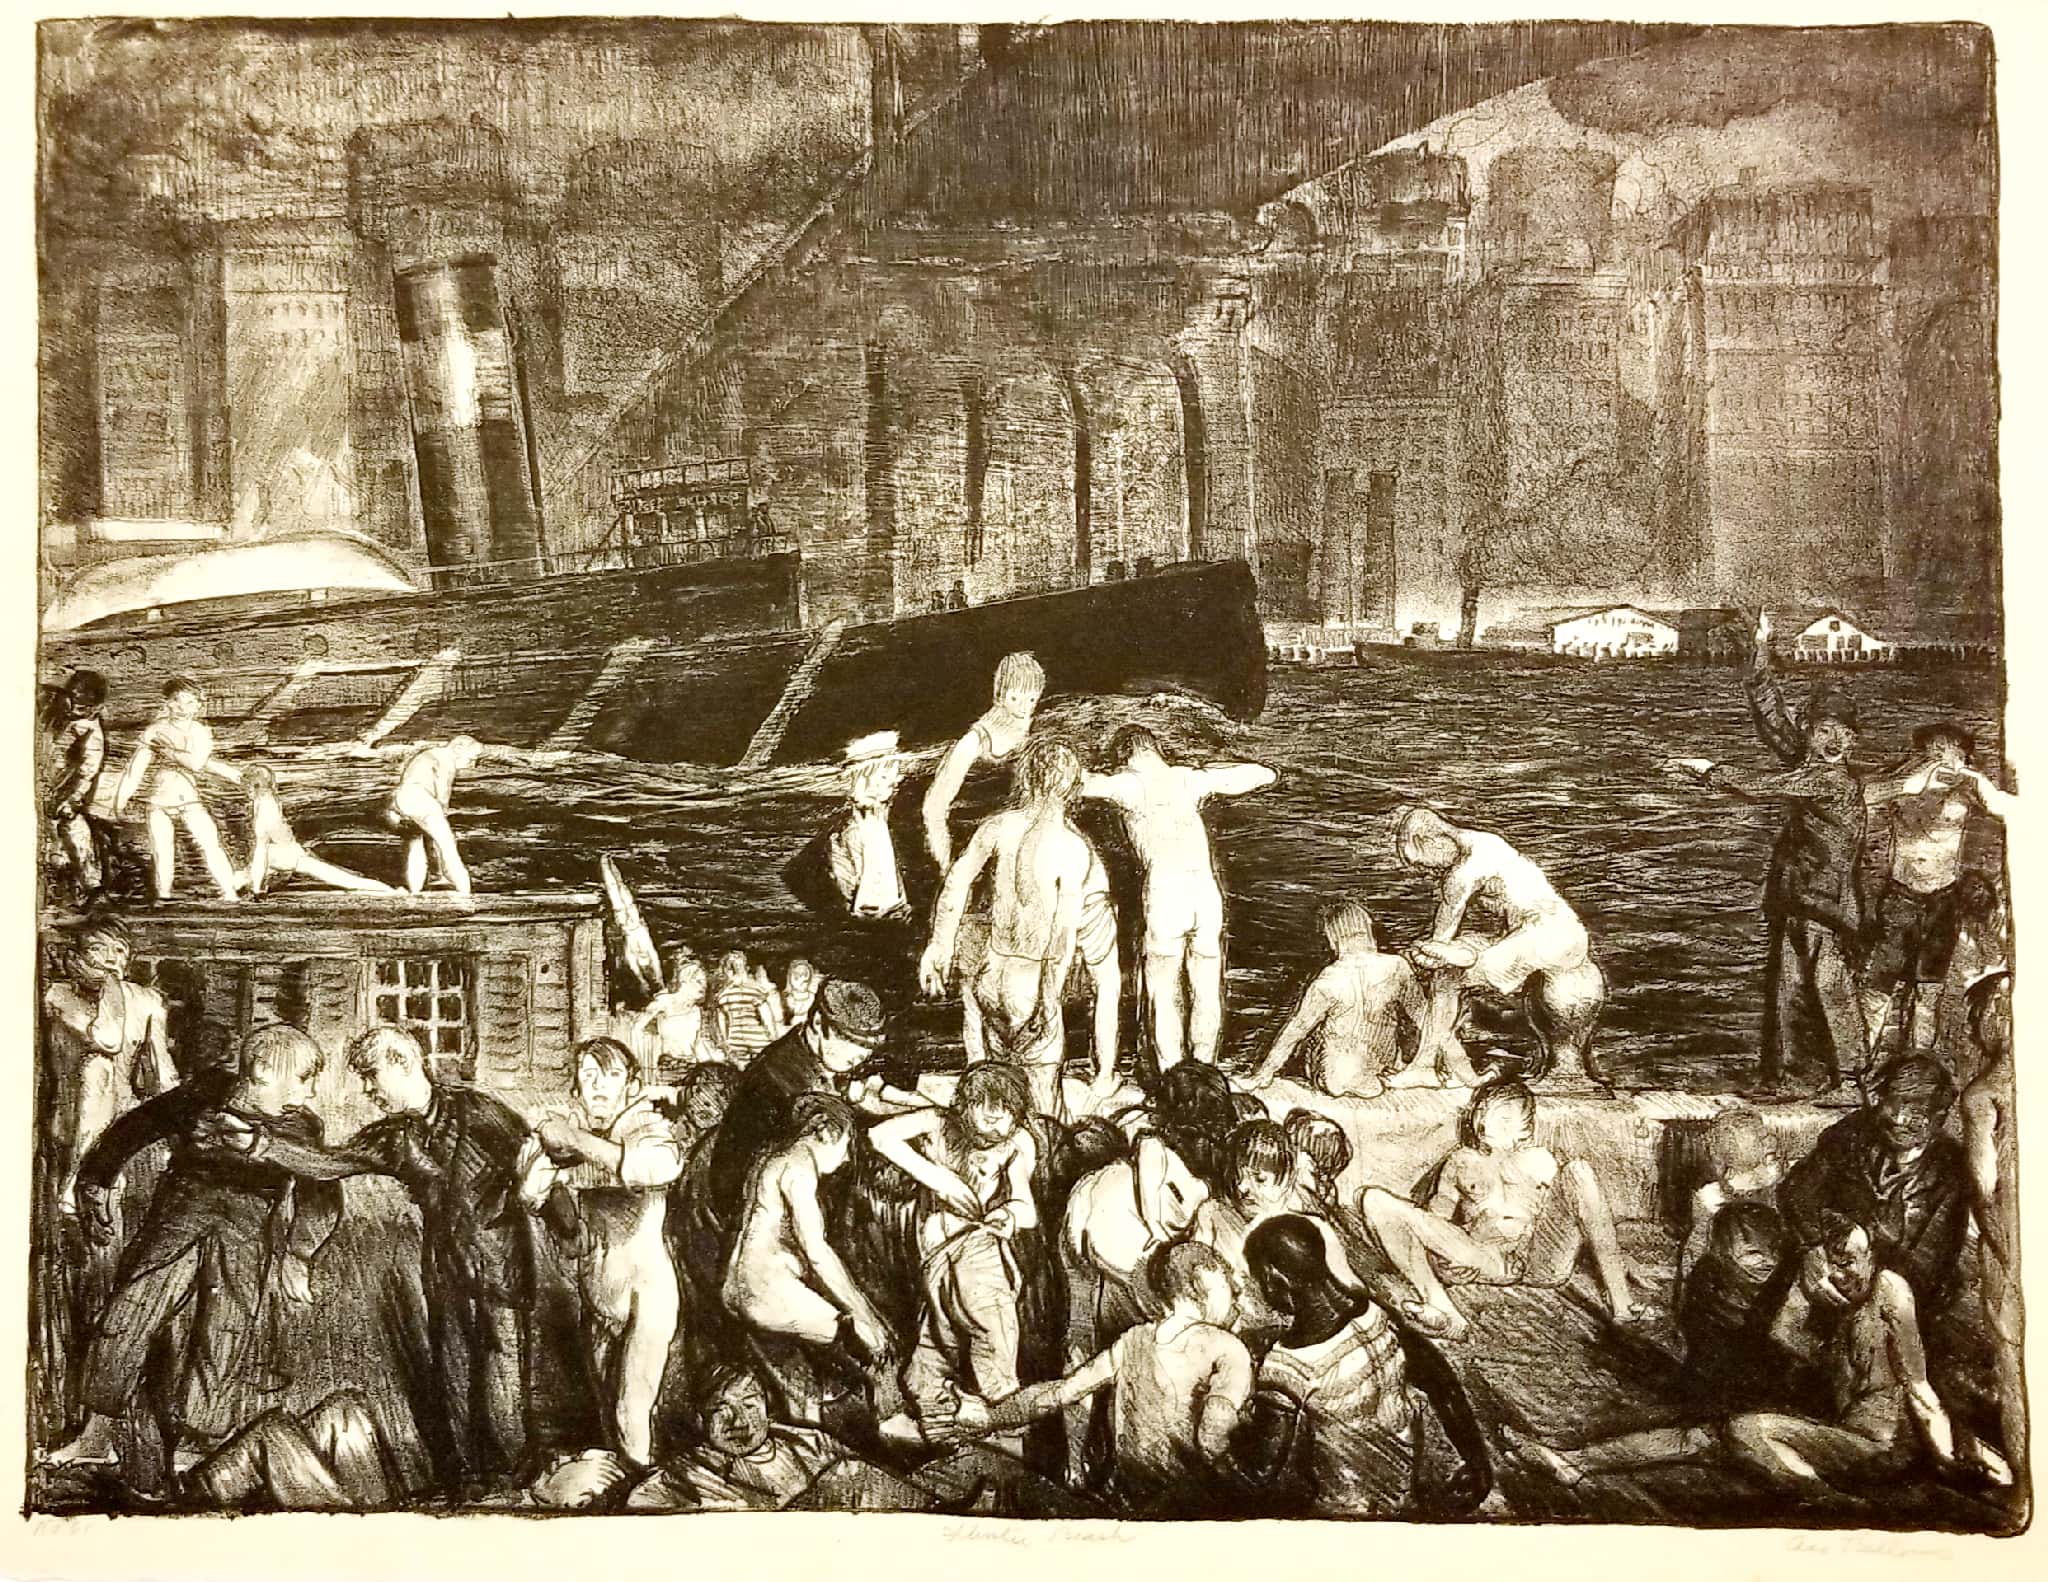 George Bellows' lithograph on cream paper and depicts young naked boys cavorting at a local swim spot along the East River under the Brooklyn Bridge. Boys gather in the foreground. The artist also included a dense and dreary cityscape in the background.